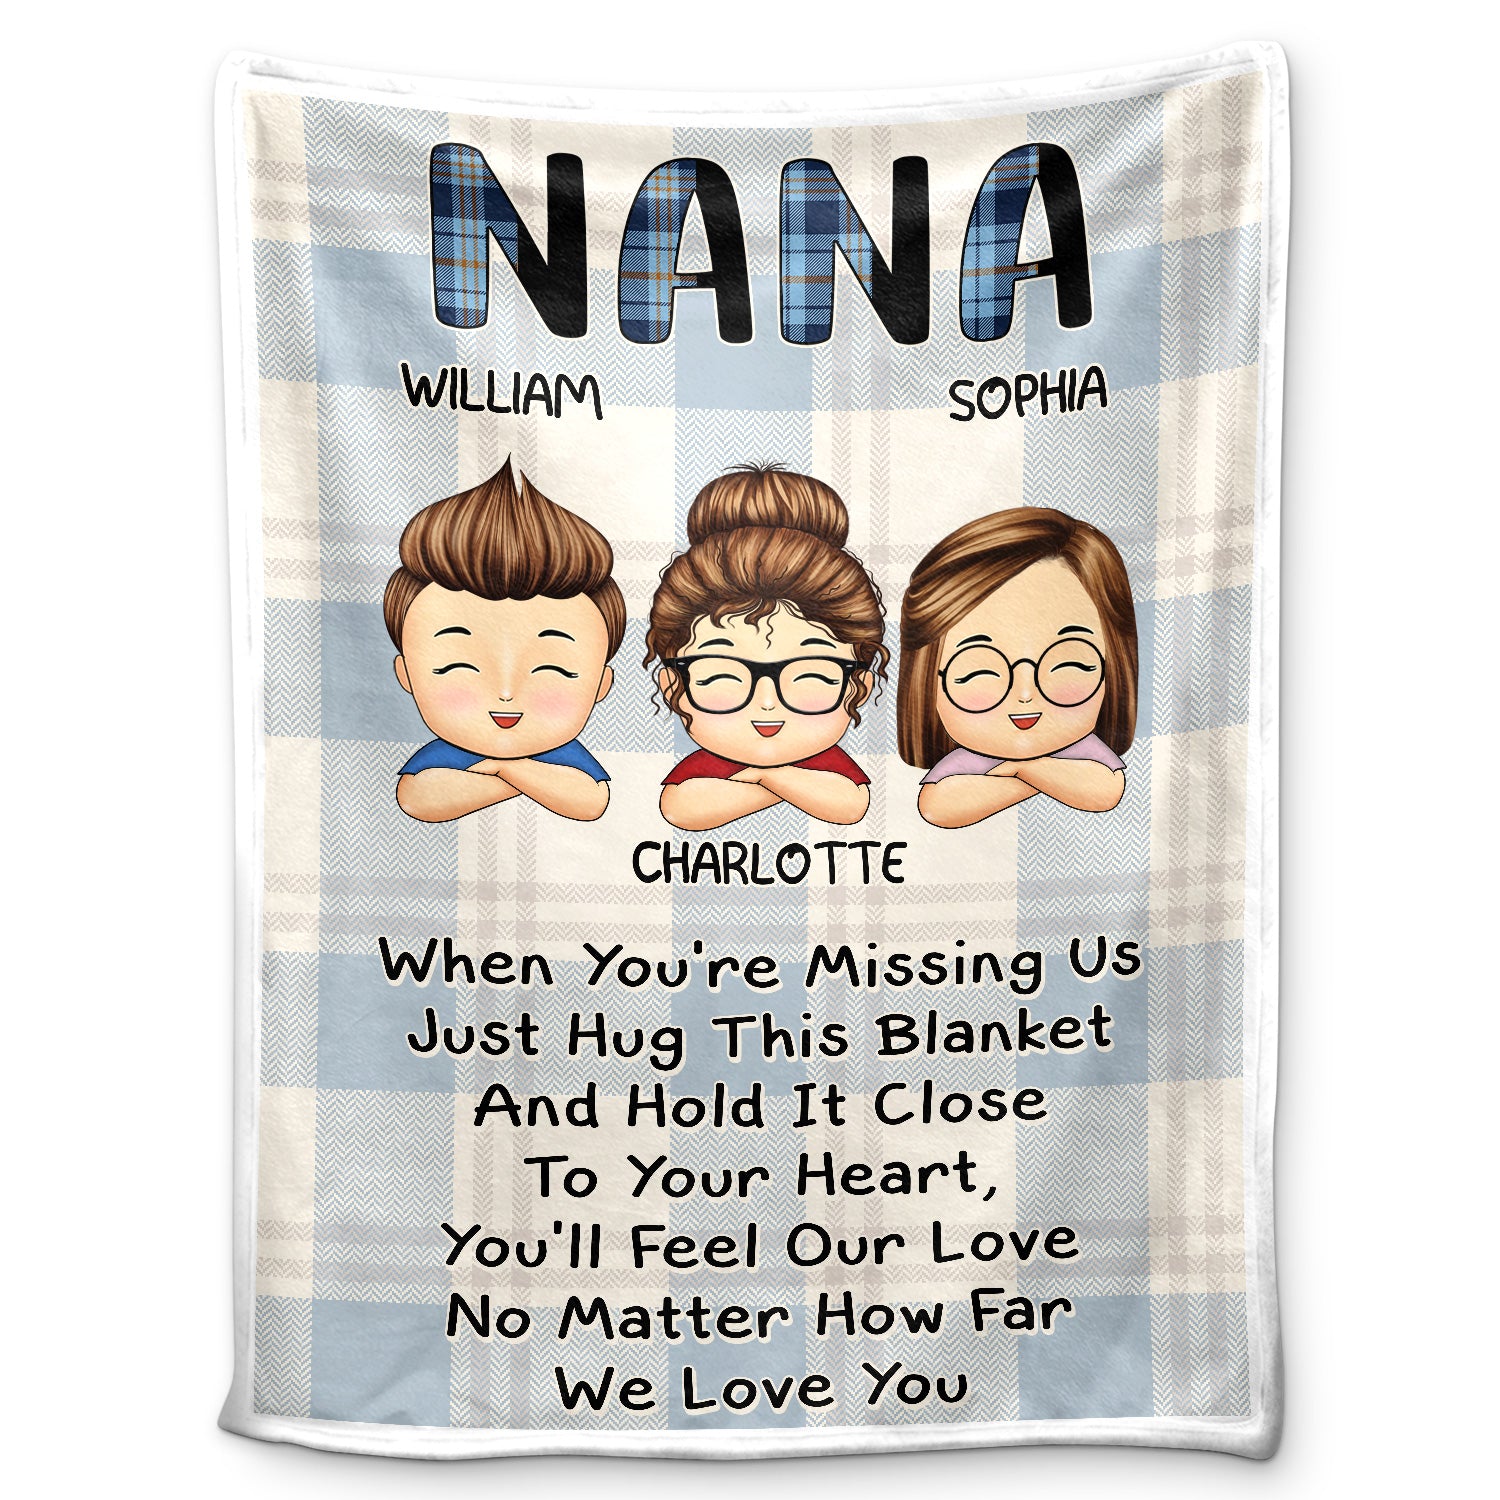 When You're Missing Us - Loving Gifts For Grandma, Grandmother, Mom - Personalized Fleece Blanket